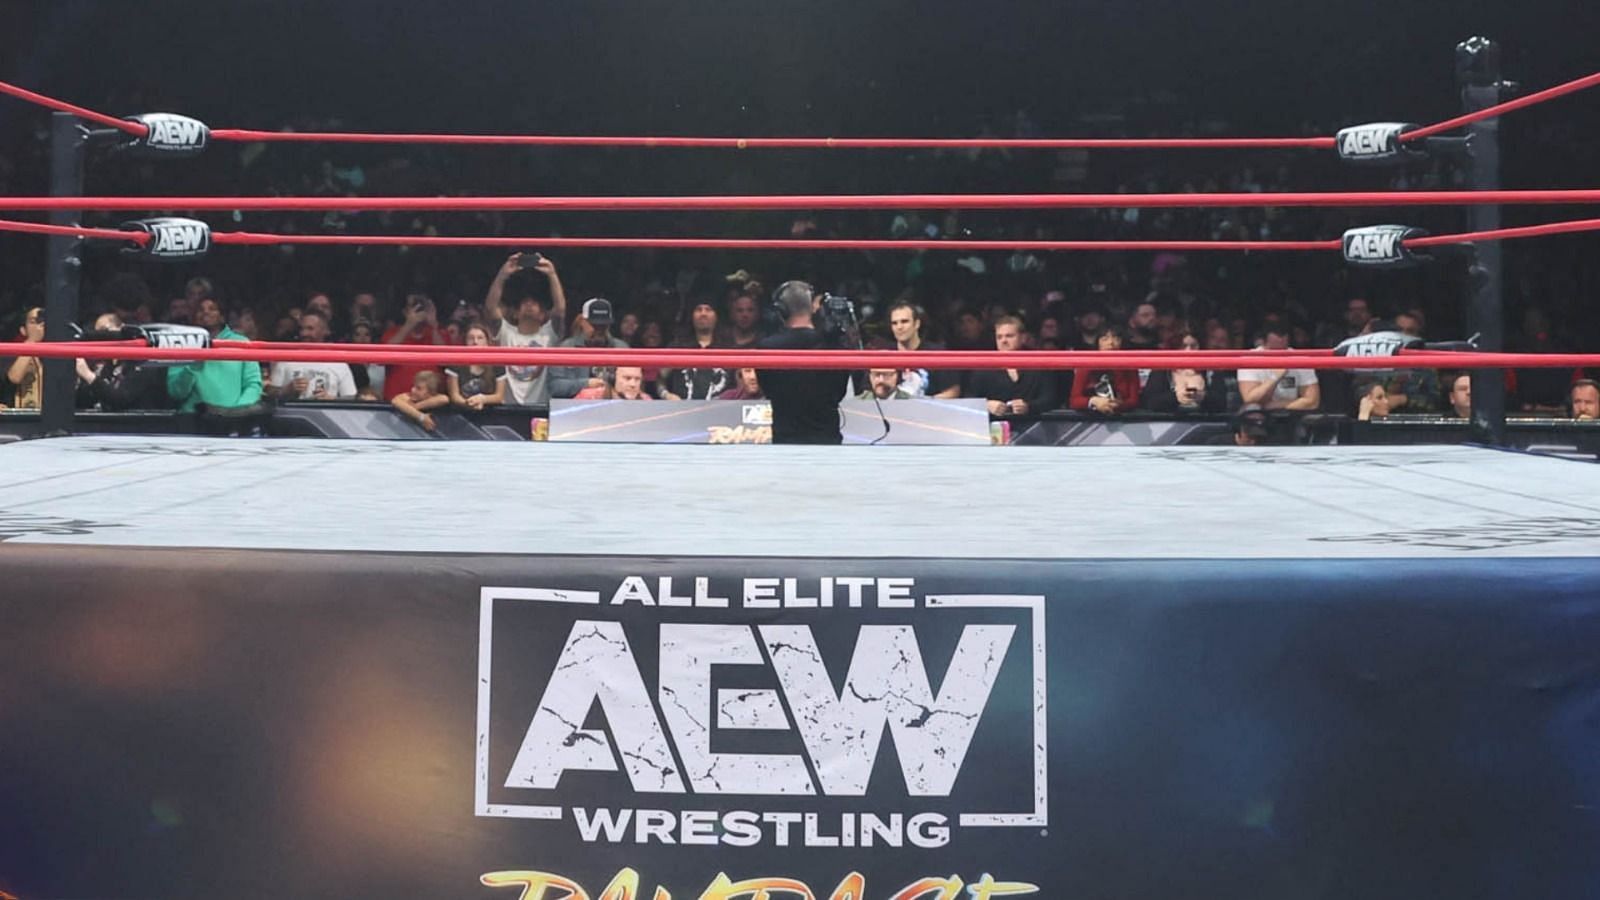 The spoilers for the upcoming AEW Collision episode has a surprising statistic [Image Credit: AEW]